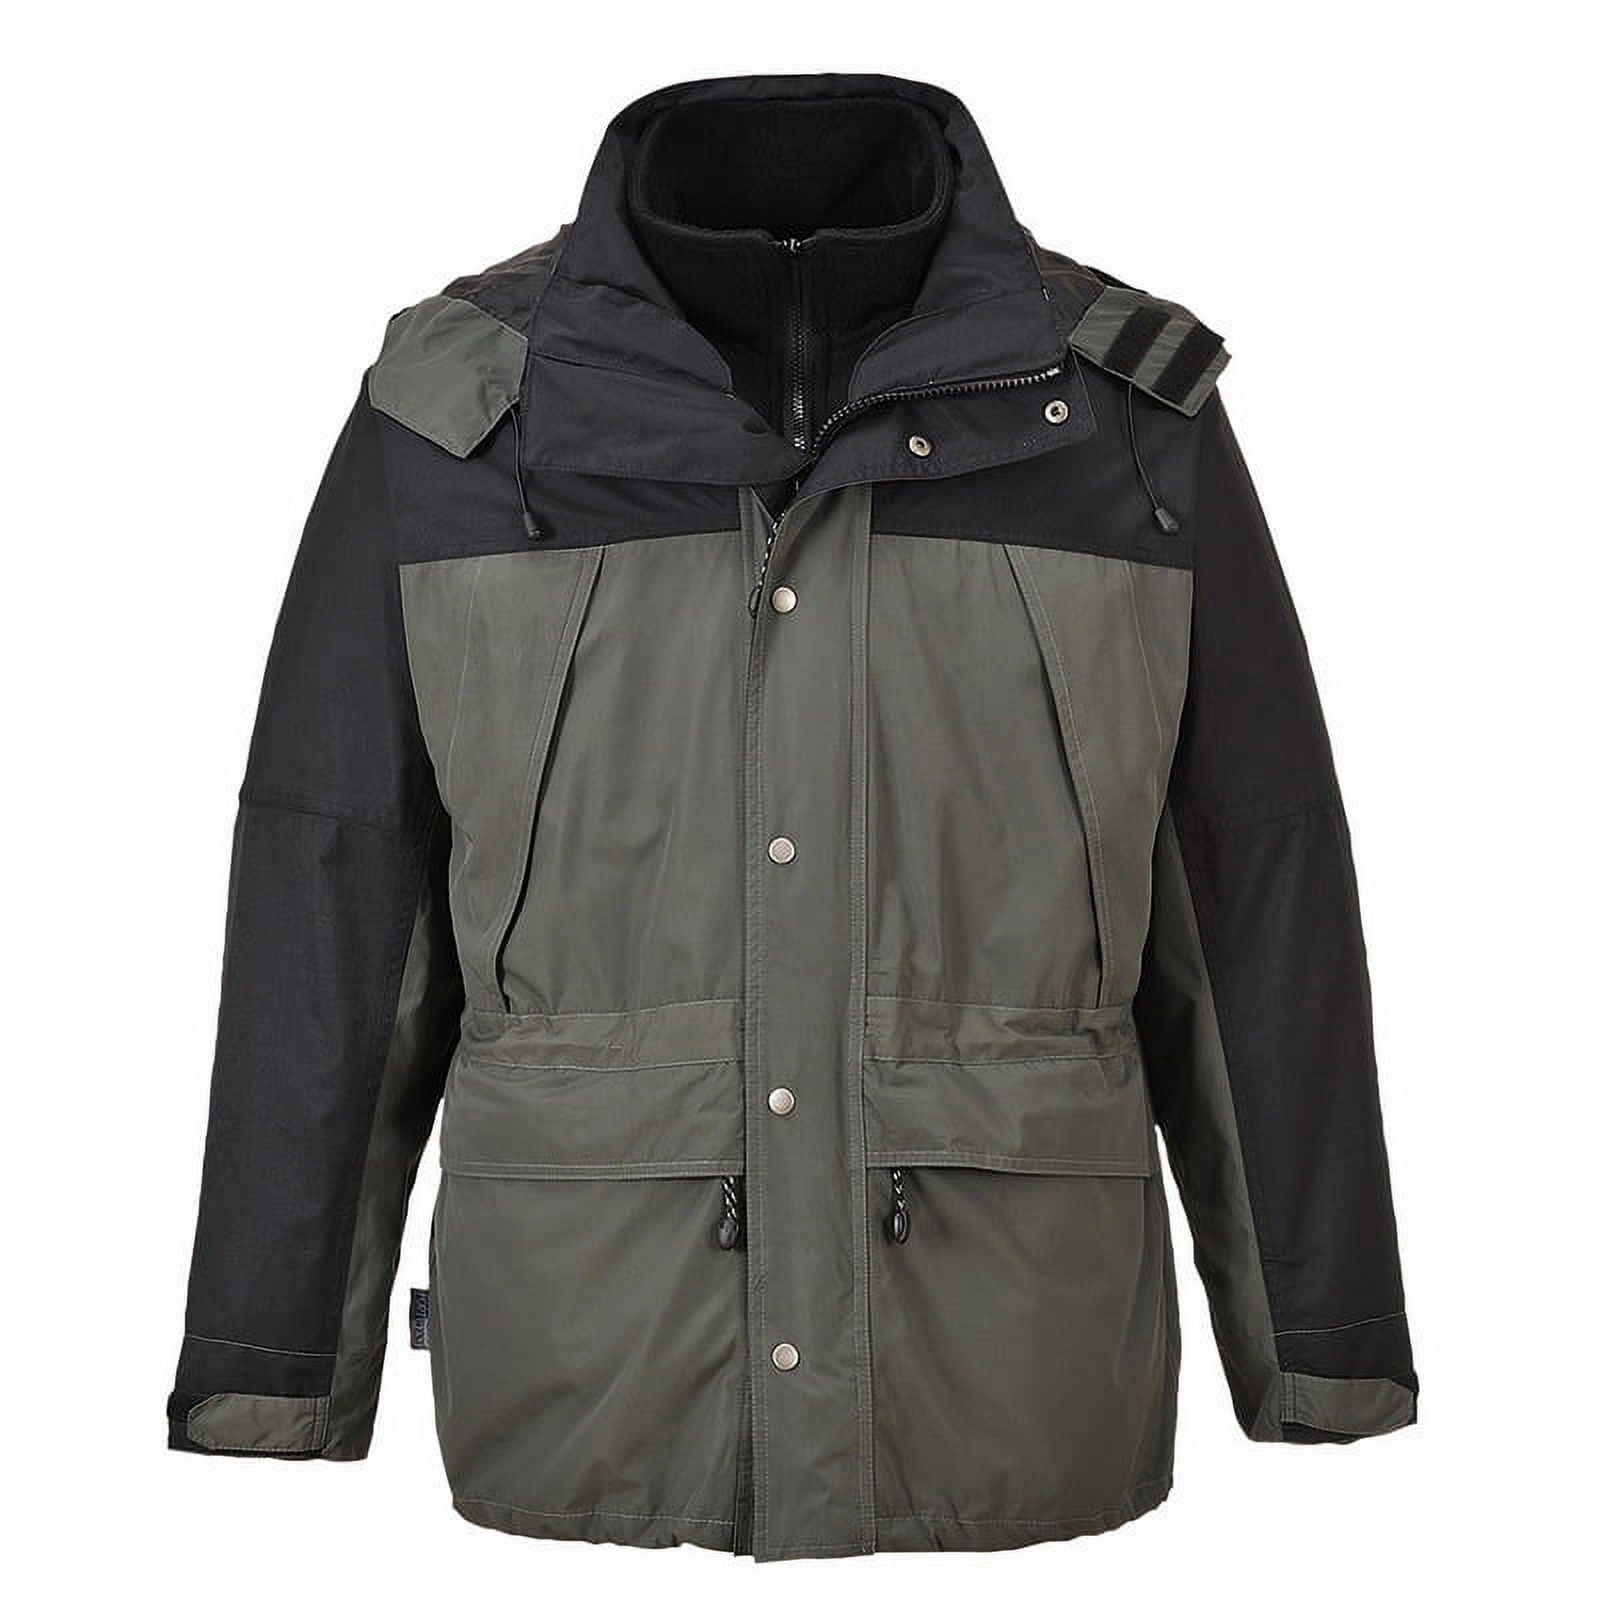 Portwest S532 Orkney 3 in 1 Waterproof Breathable All Weather Jacket Gray, Large - image 1 of 4